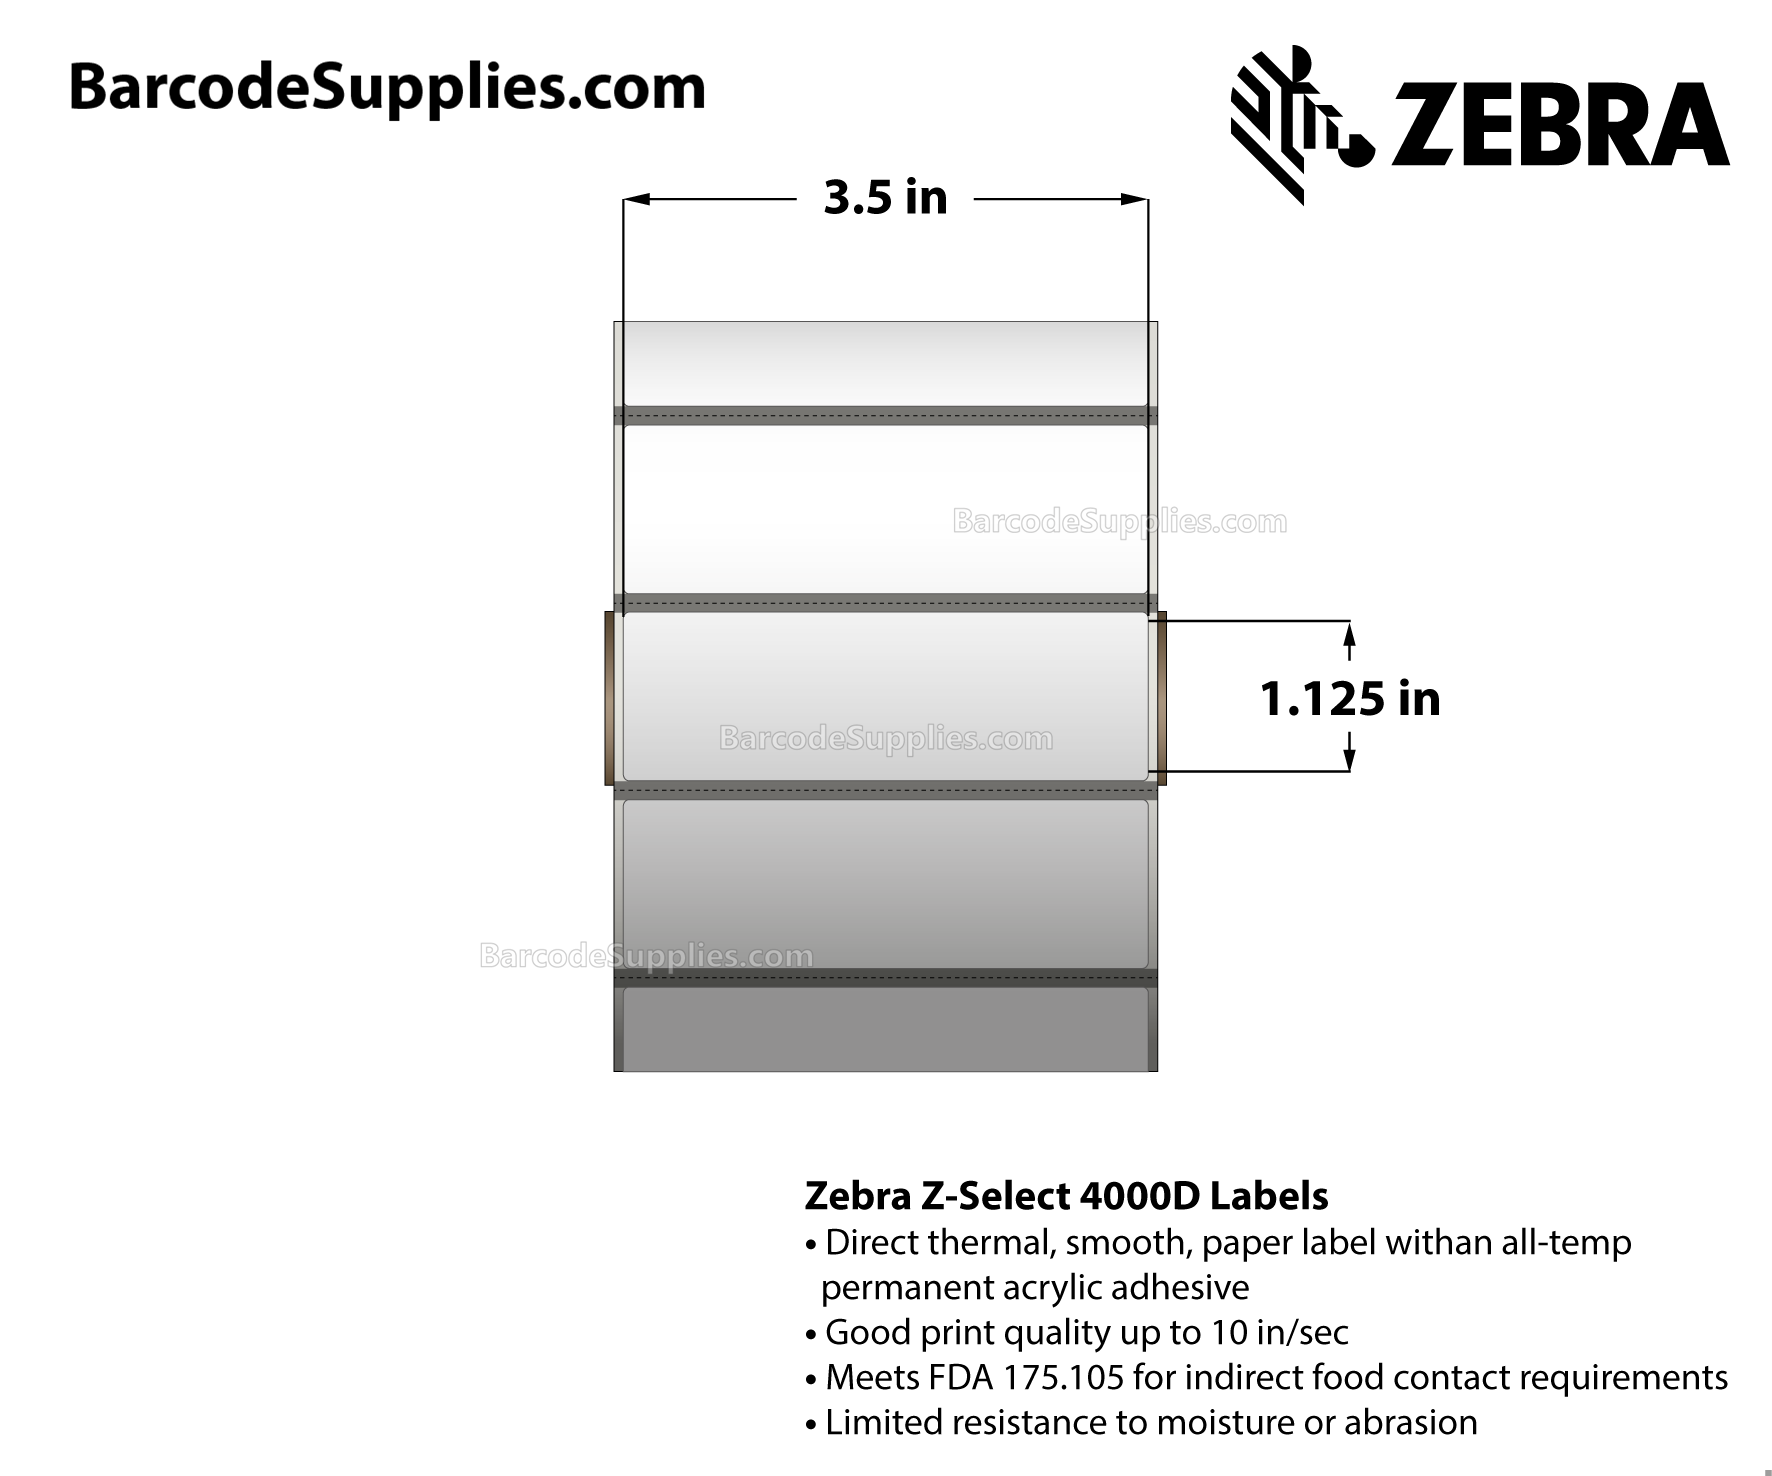 3.5 x 1.125 Direct Thermal White Z-Select 4000D Labels With All-Temp Adhesive - Label has square edges - Black mark sensing - Perforated - 2374 Labels Per Roll - Carton Of 4 Rolls - 9496 Labels Total - MPN: 10013885